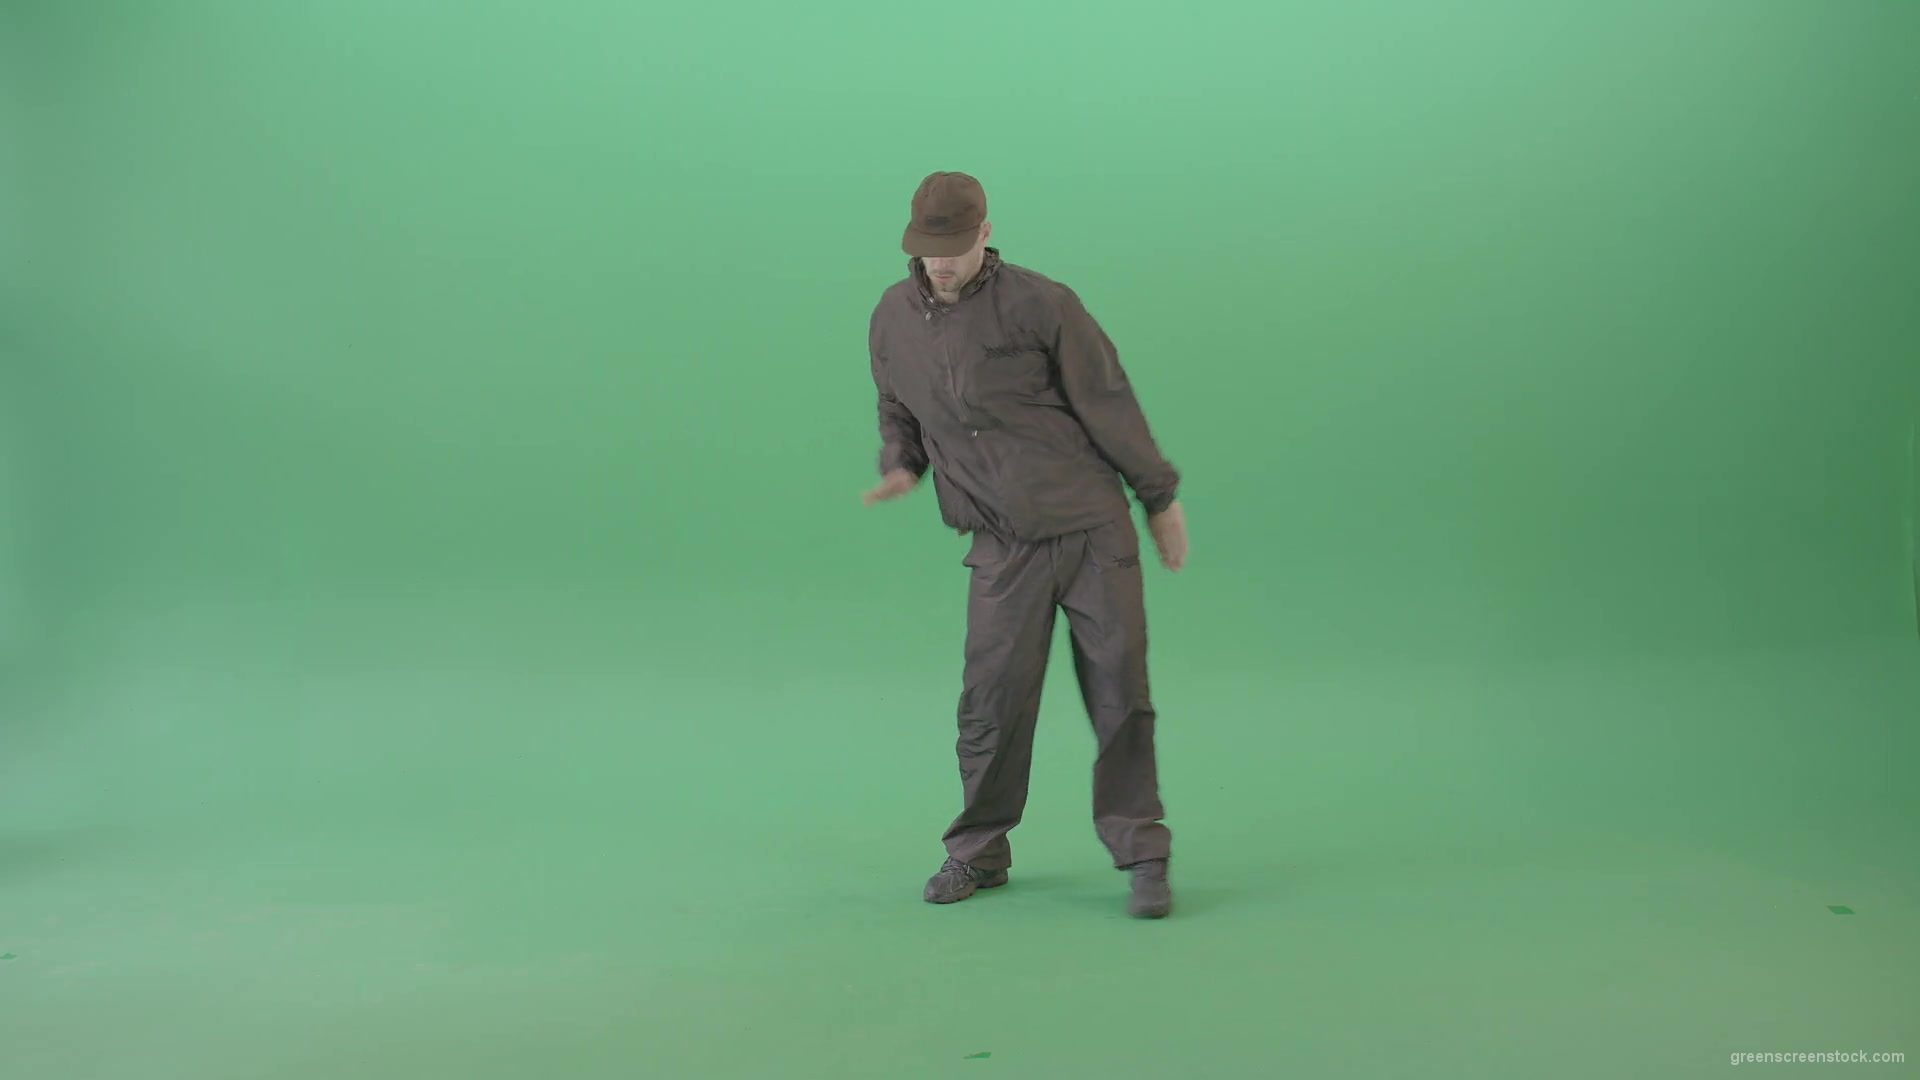 Top-Break-dance-by-electric-boogie-hip-hop-dancer-isolated-on-green-screen-4K-Video-Footage-1920_007 Green Screen Stock